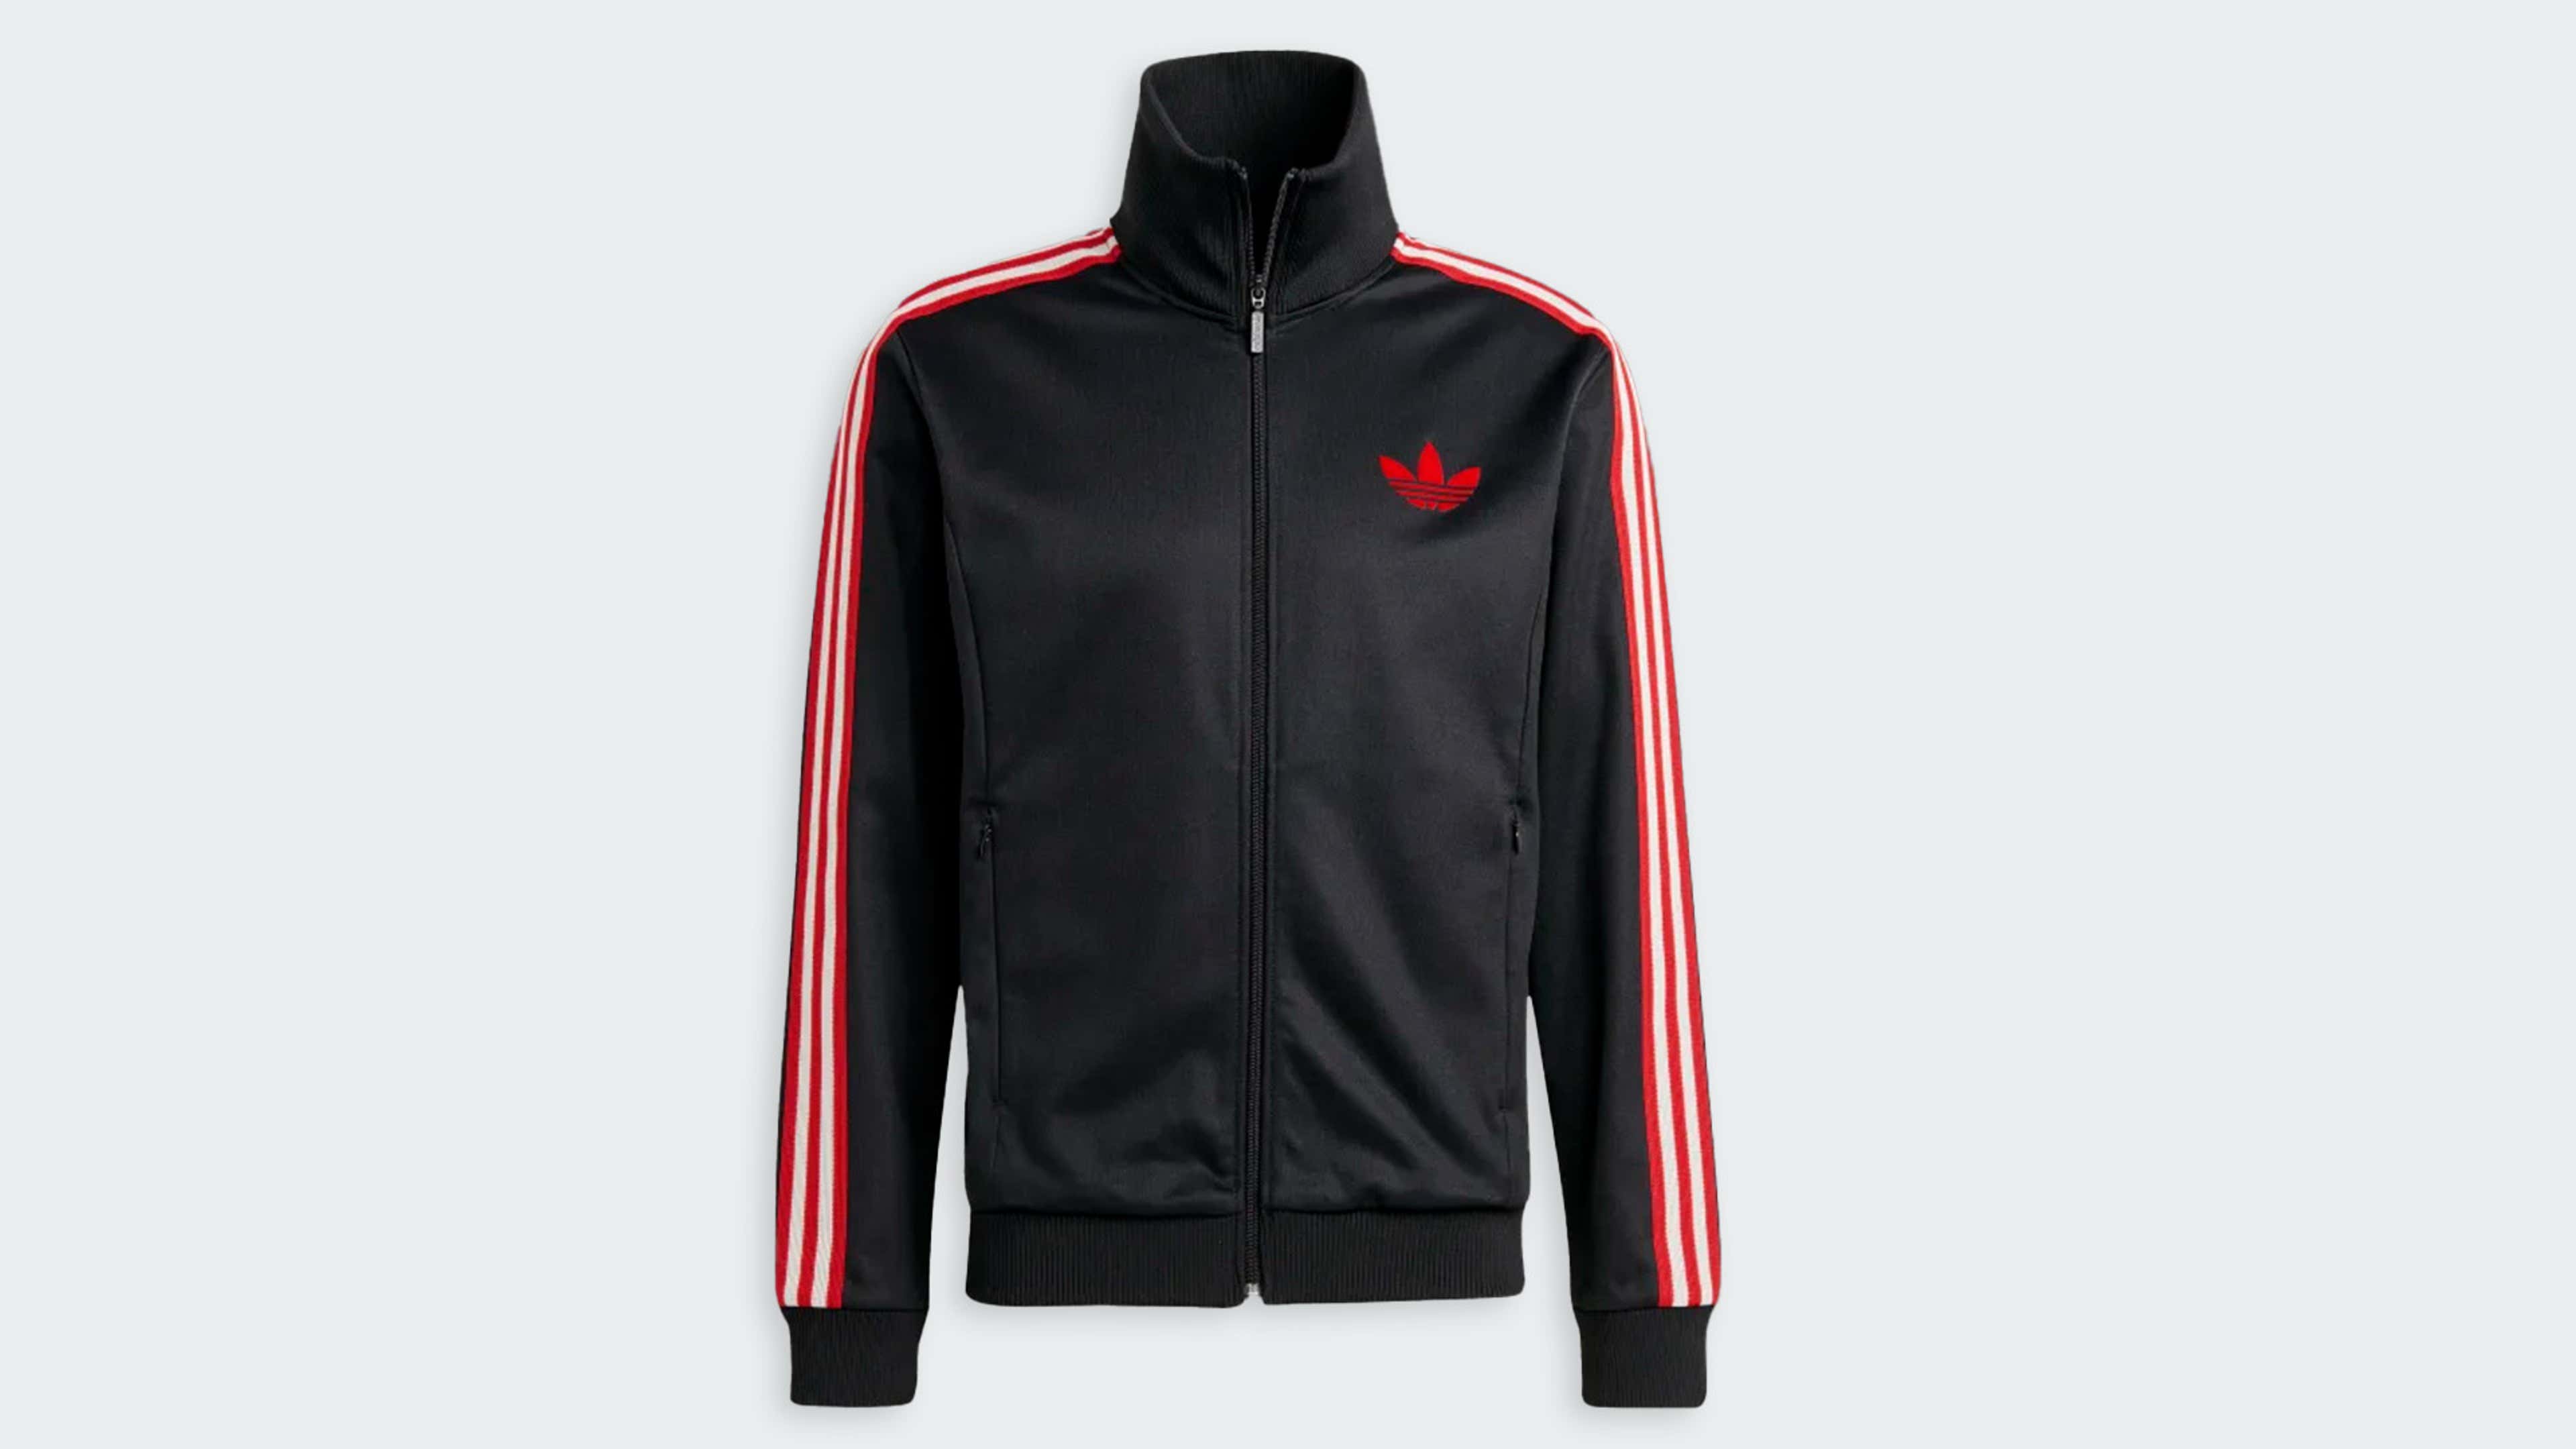 Ajax and adidas look back to the legendary for an adidas Originals collection |